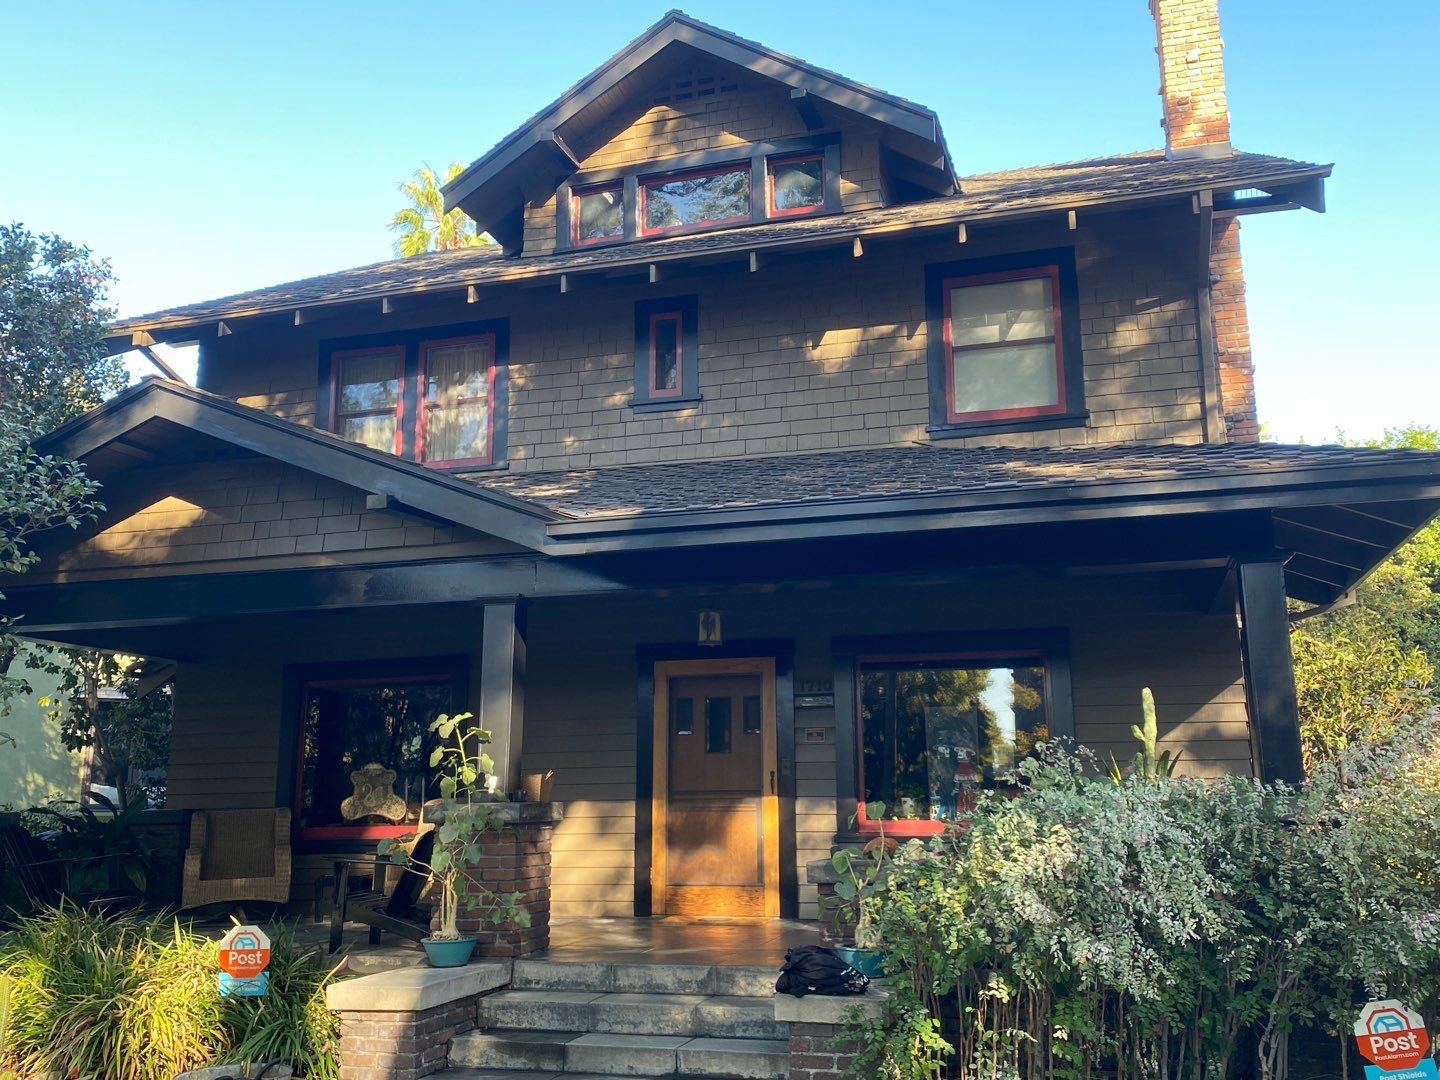 House Painting in South Pasadena